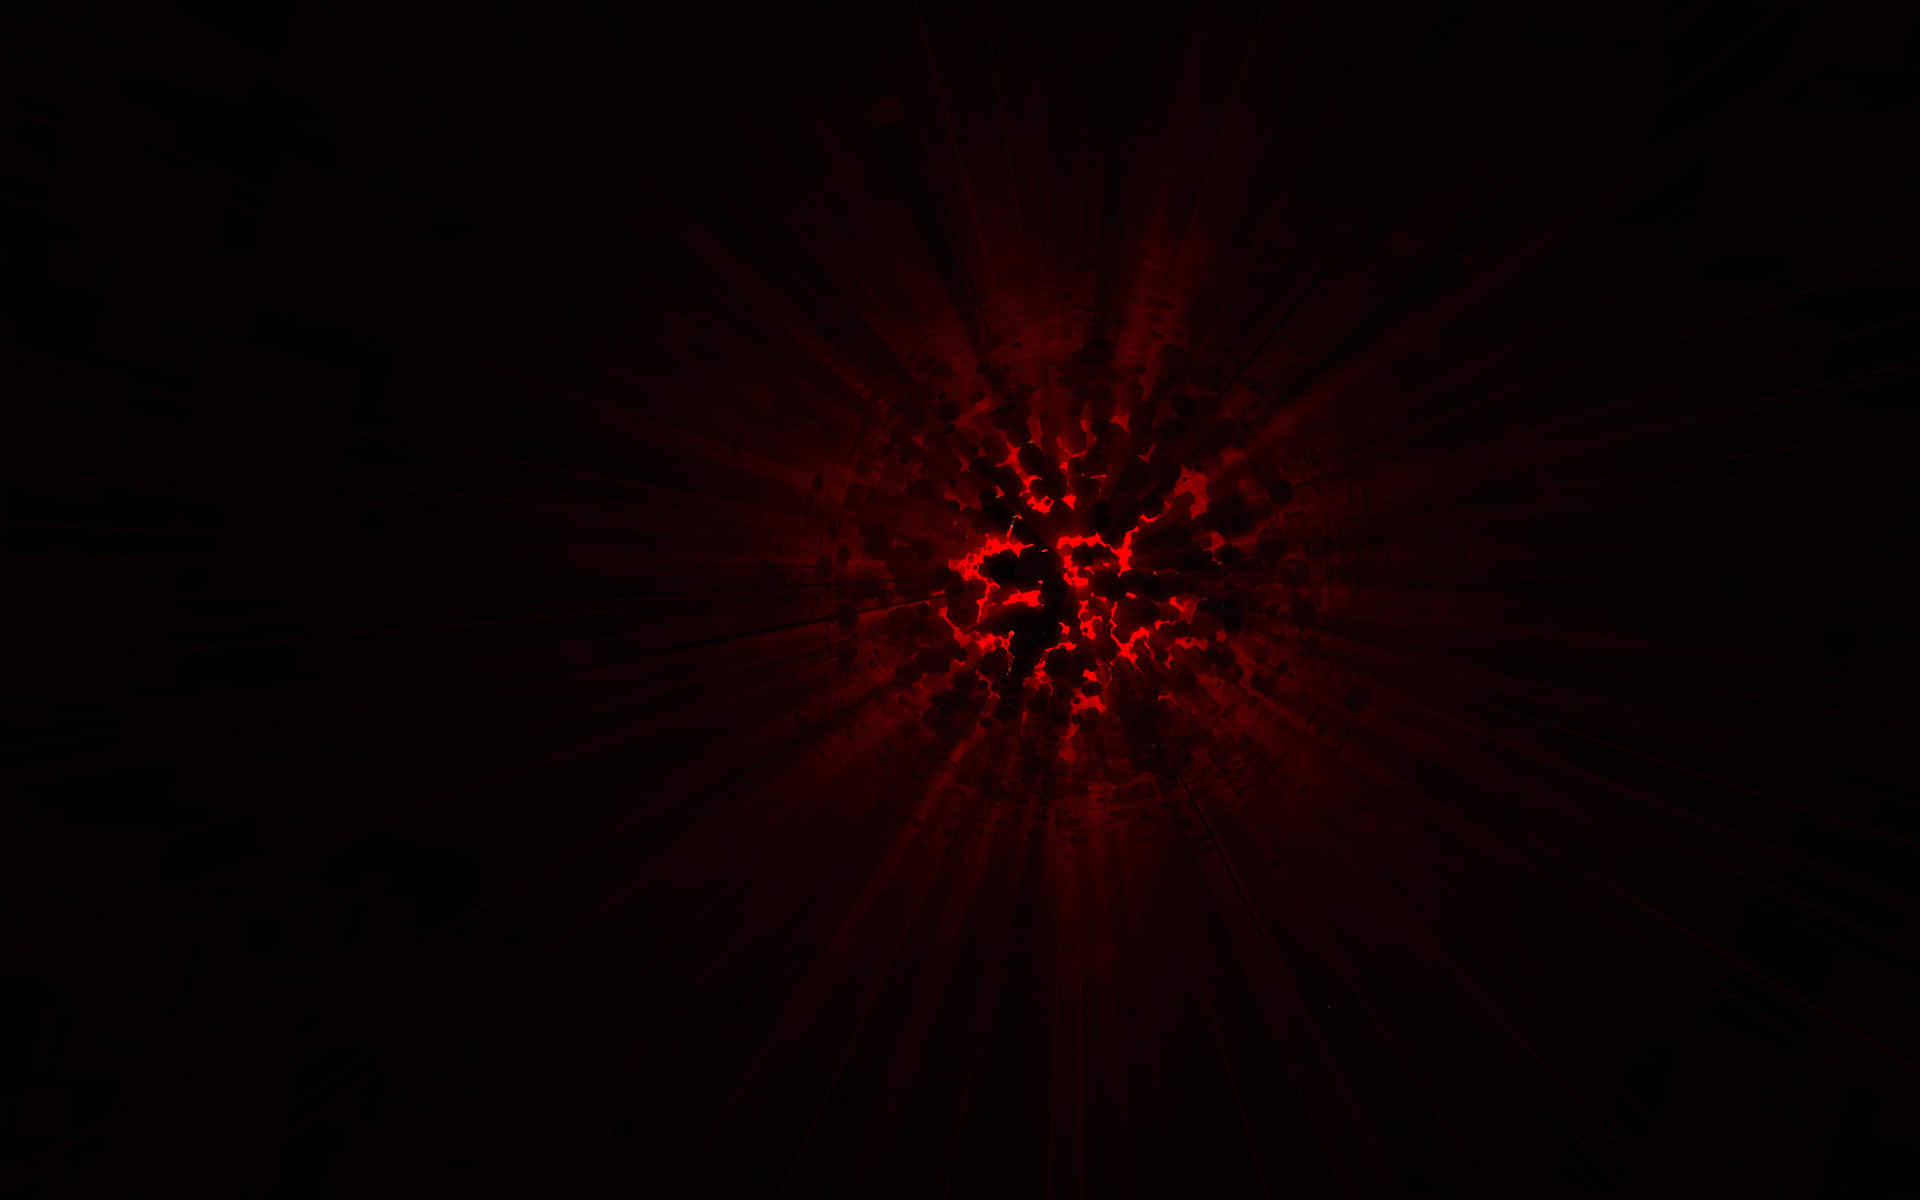 A vibrant 1080p red and black background that creates a stunning visual.